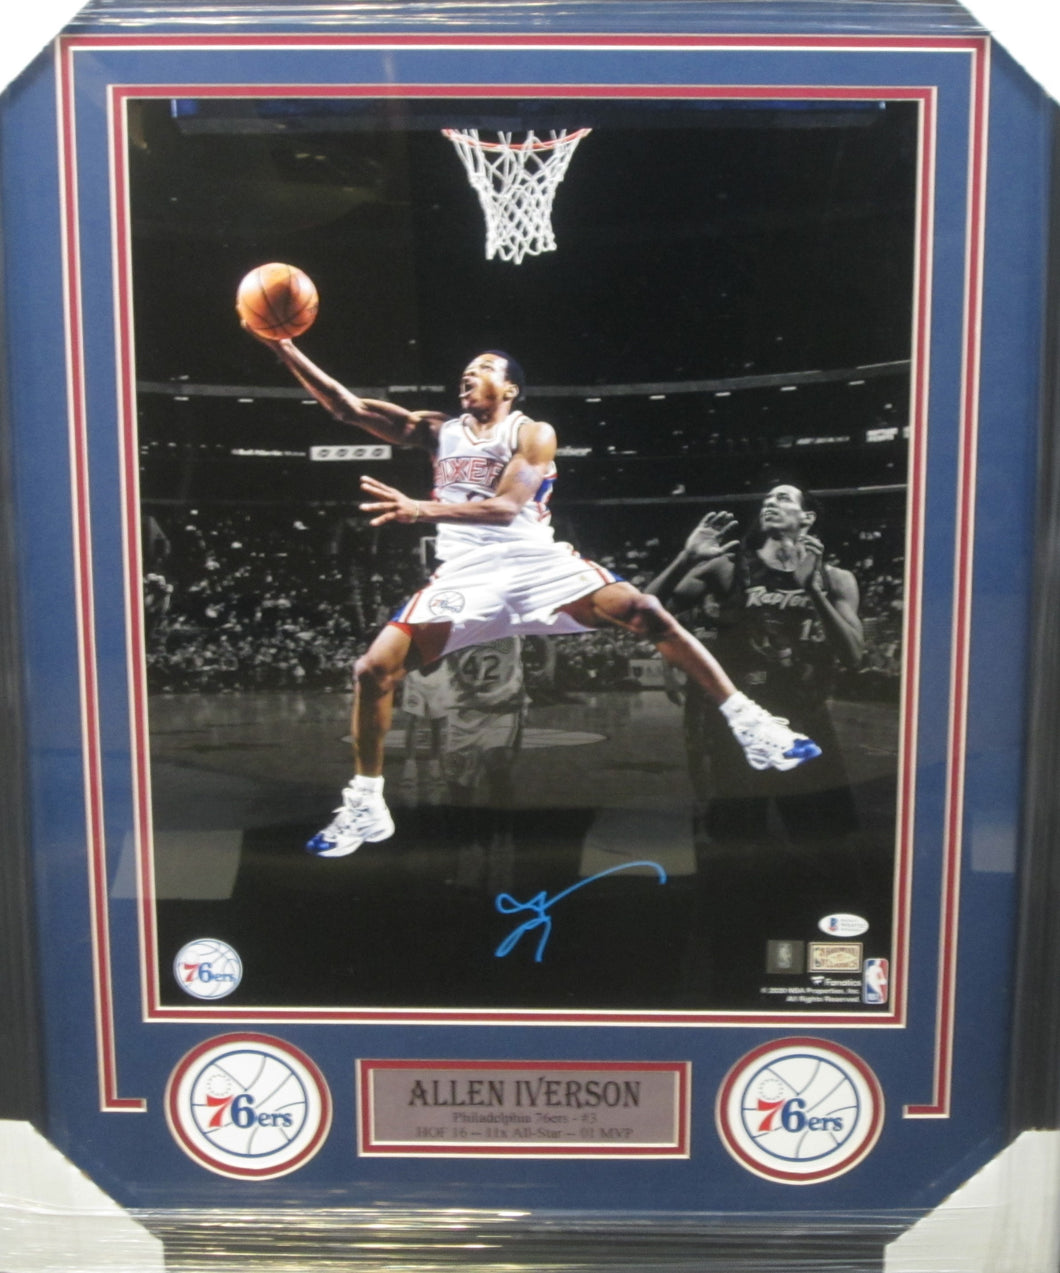 Philadelphia 76ers Allen Iverson Signed 16x20 Collage Photo Framed & Matted with BECKETT COA